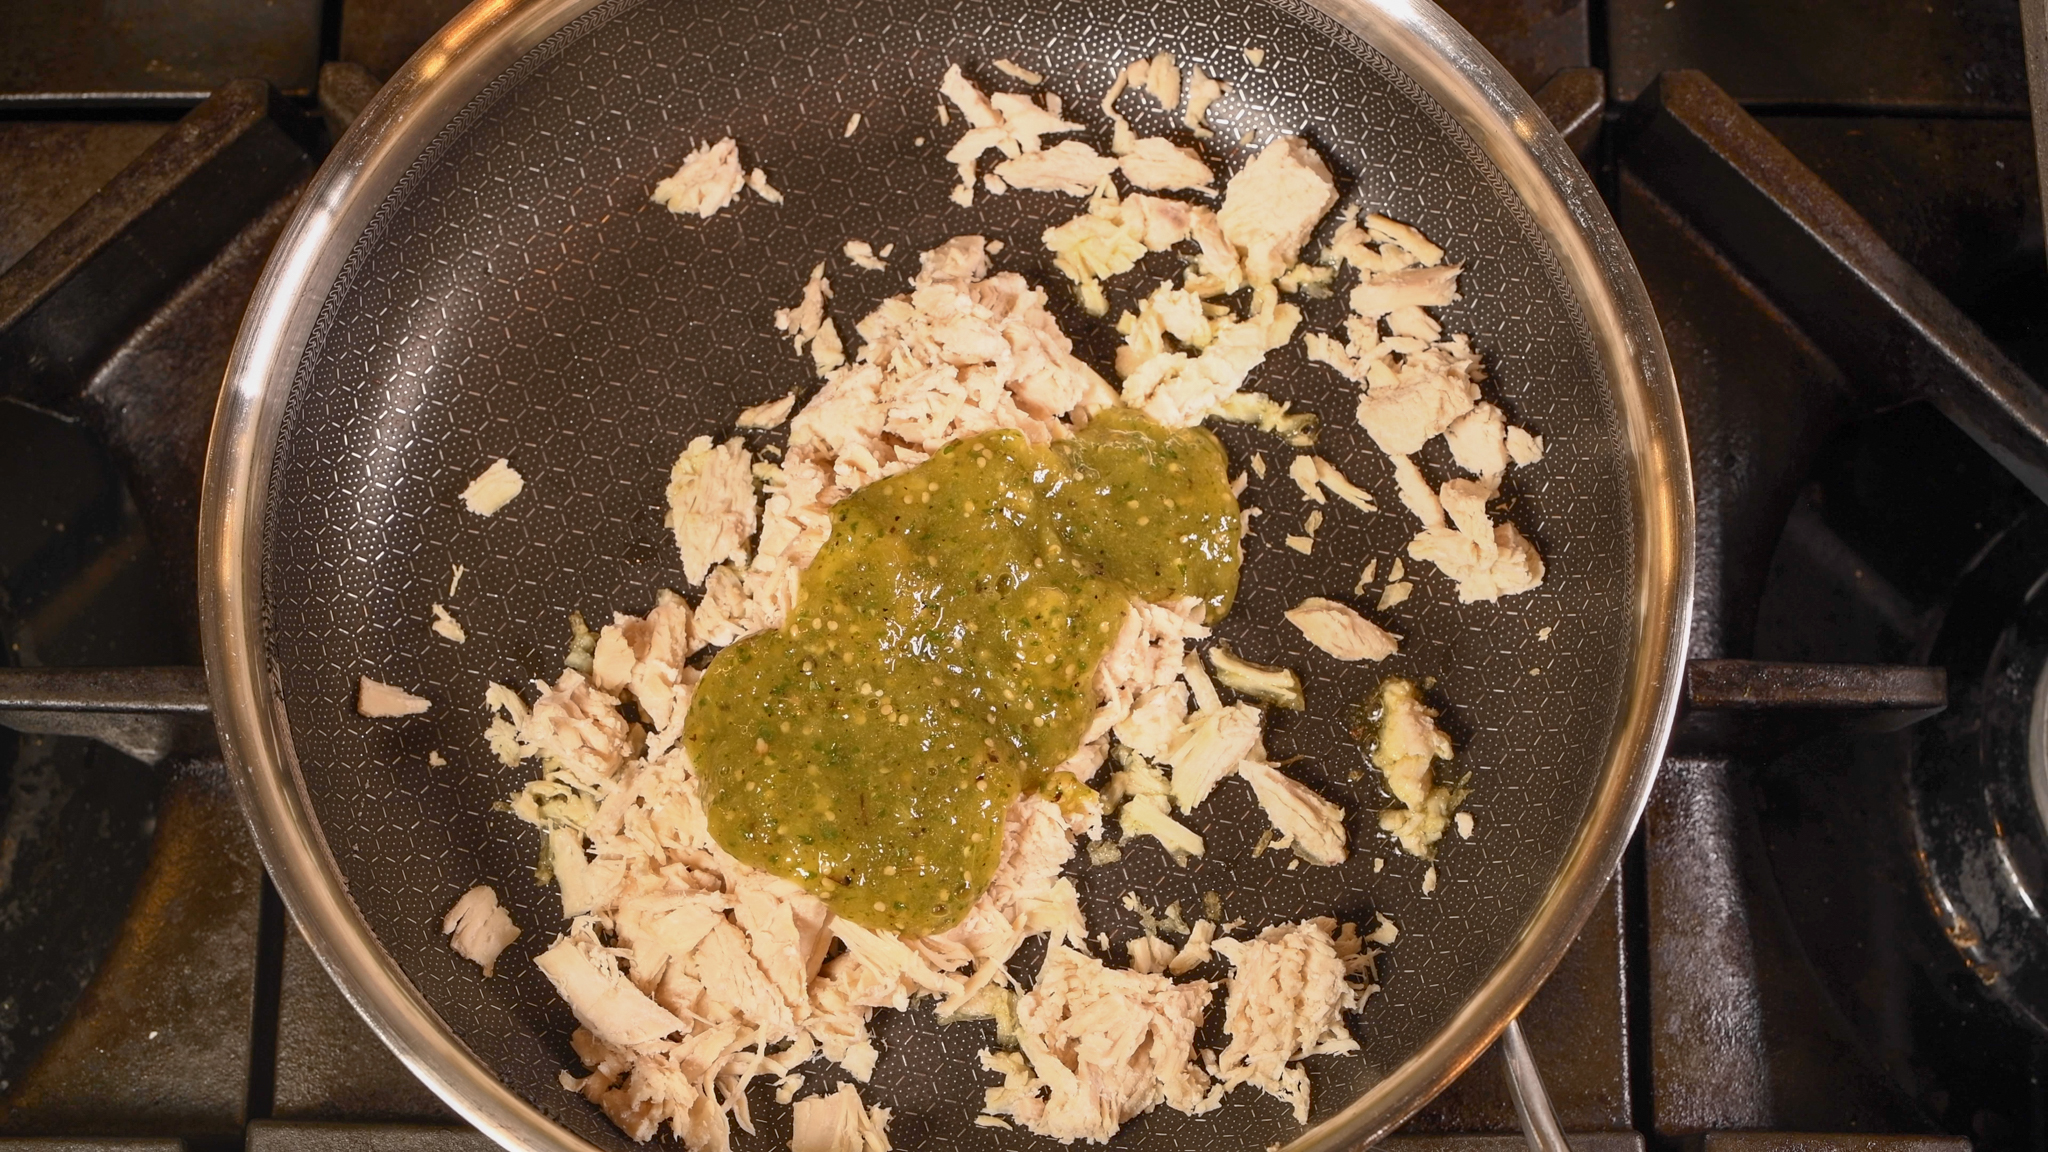 Add the Salsa Verde to the Chicken and Stir.